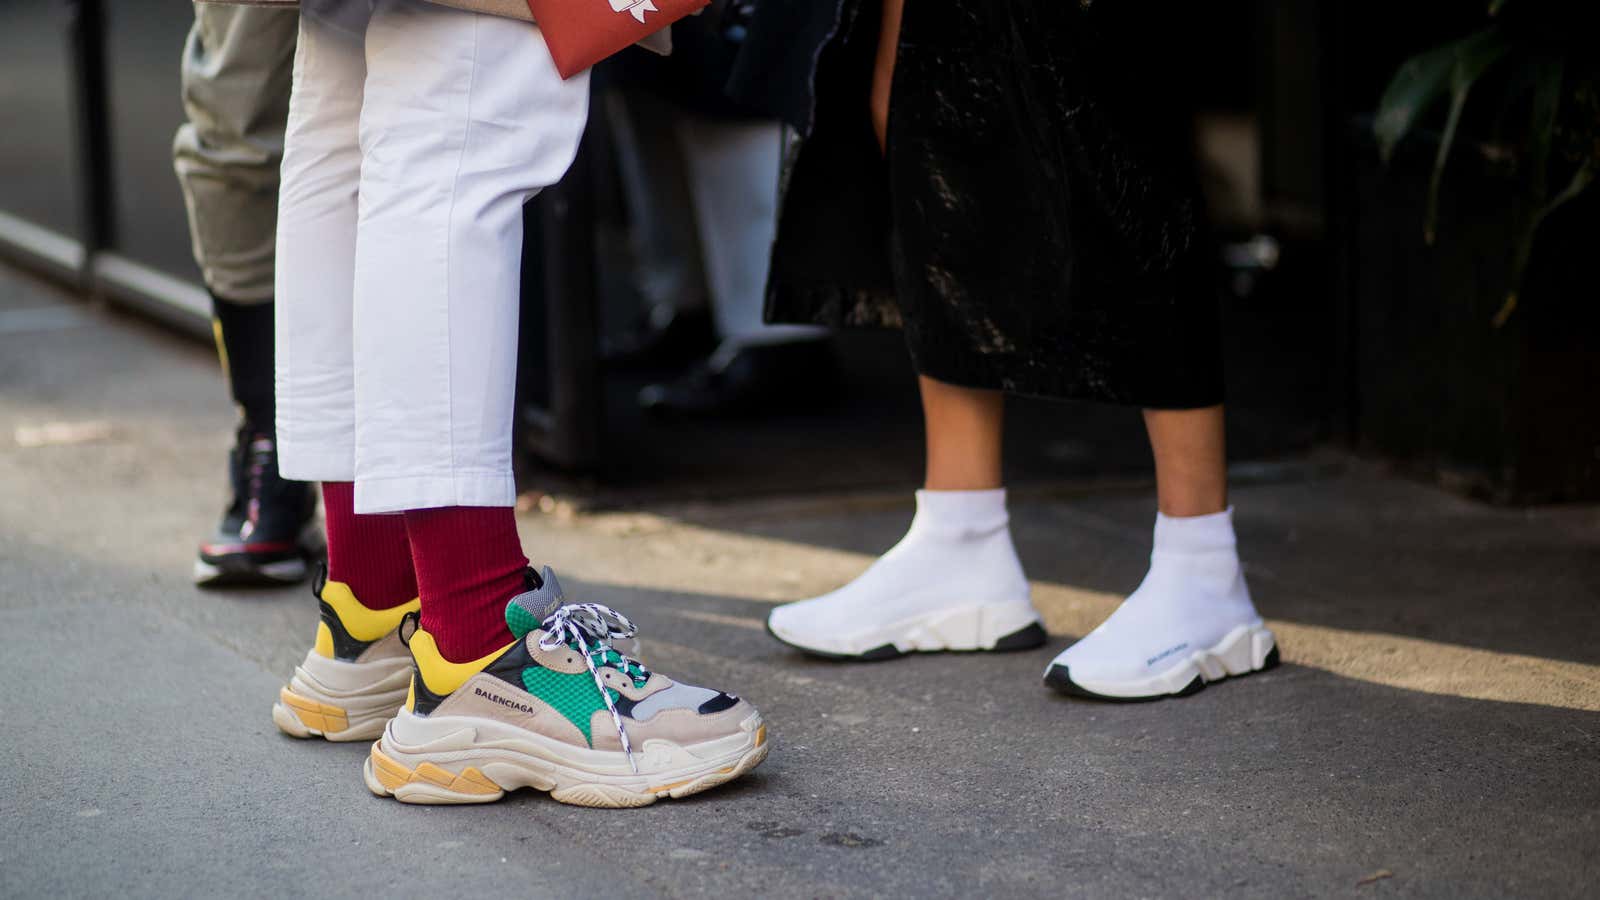 Why are Balenciaga shoes so ugly (primarily their sneakers)? - Quora